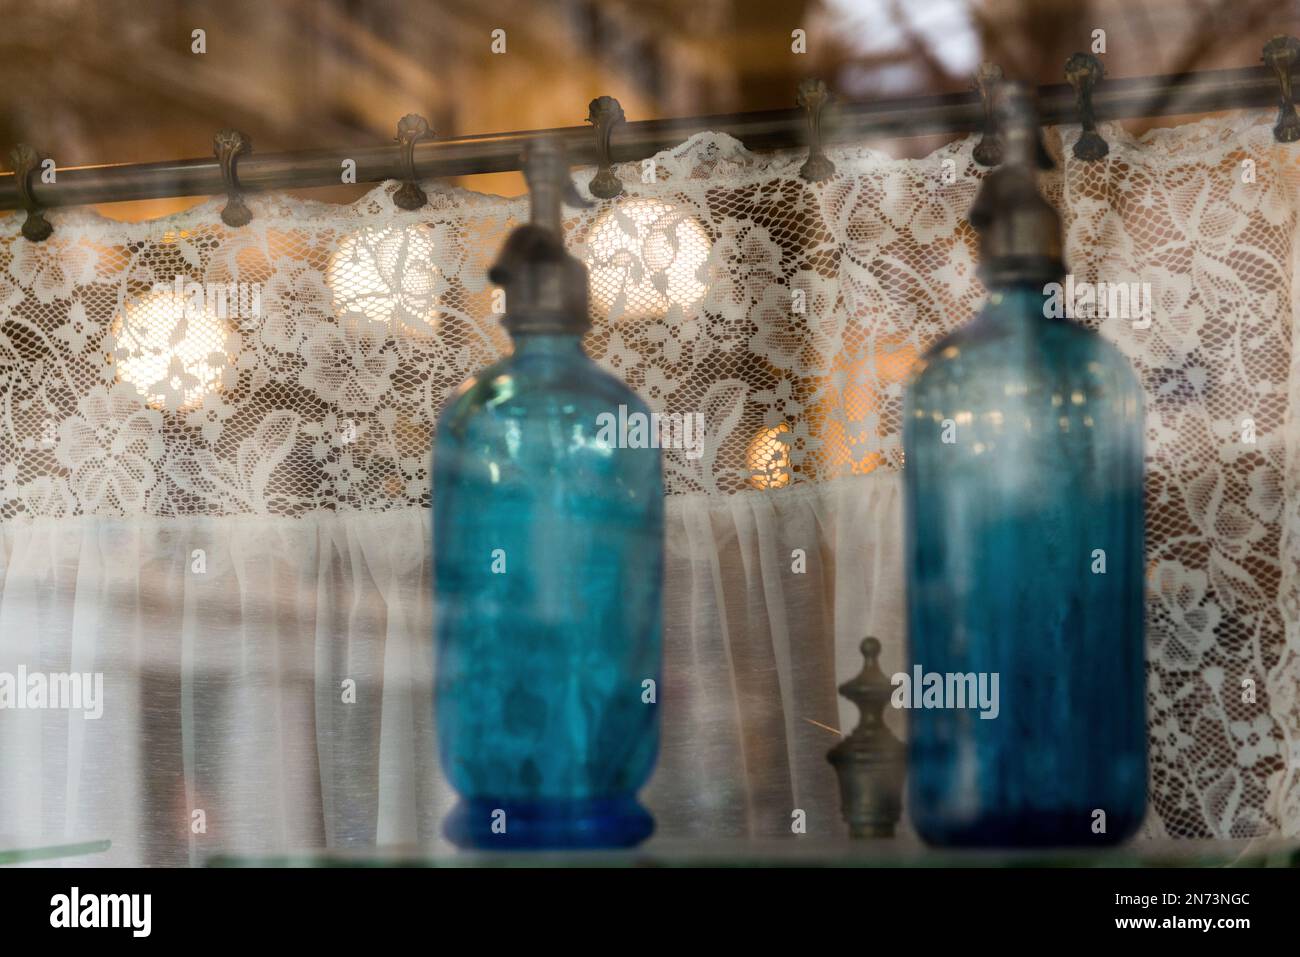 Window, France, antique bottles, lace curtain, glass Stock Photo